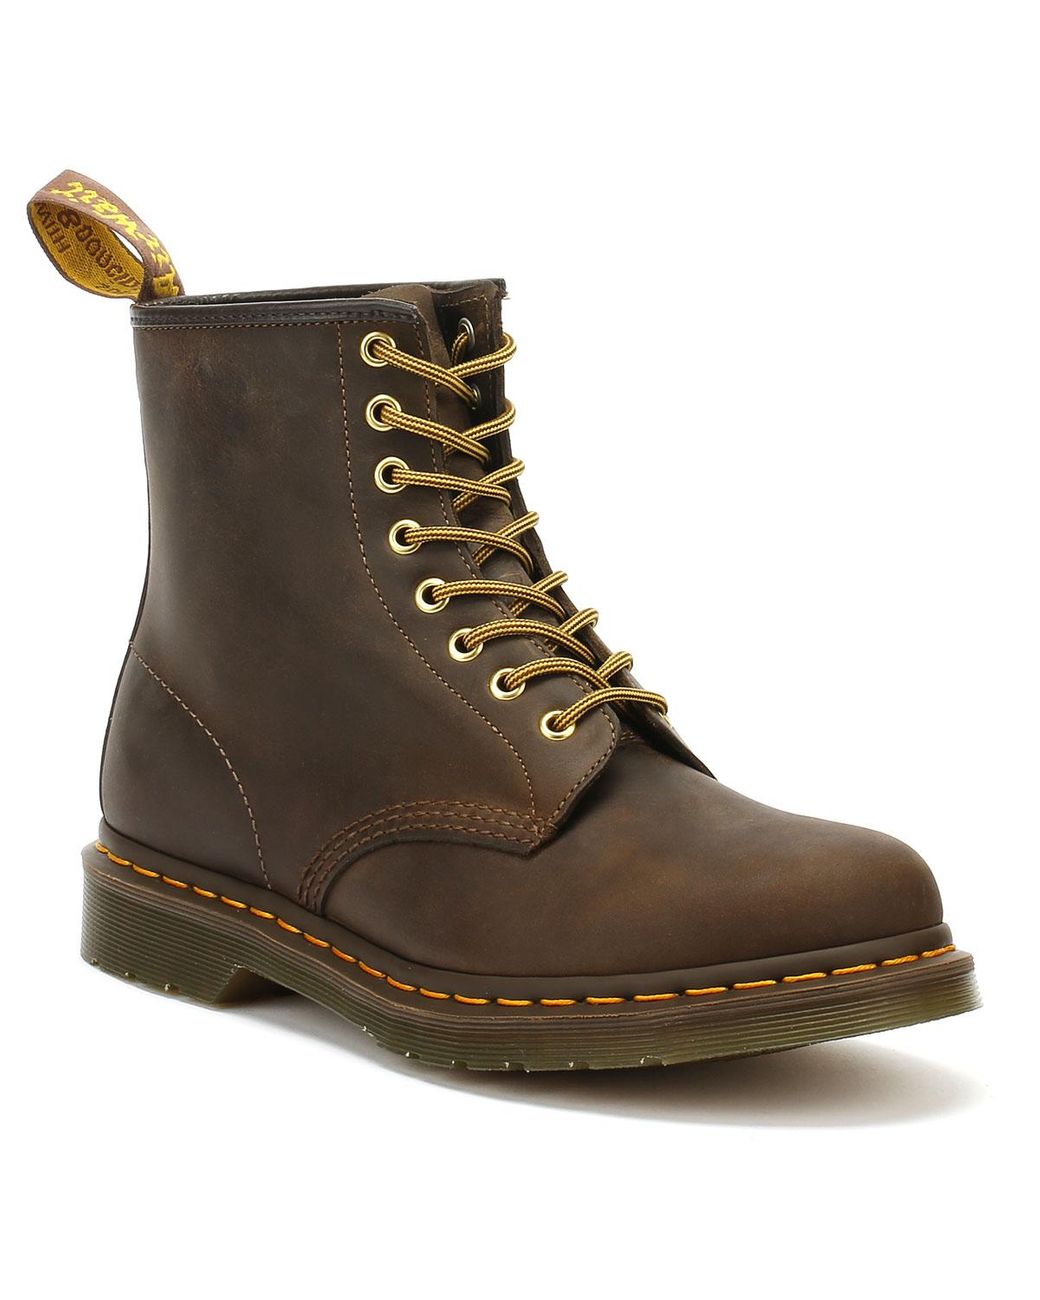 Dr. Martens Leather 1460 Original, Unisex-adult Lace-up Boots in Brown ...